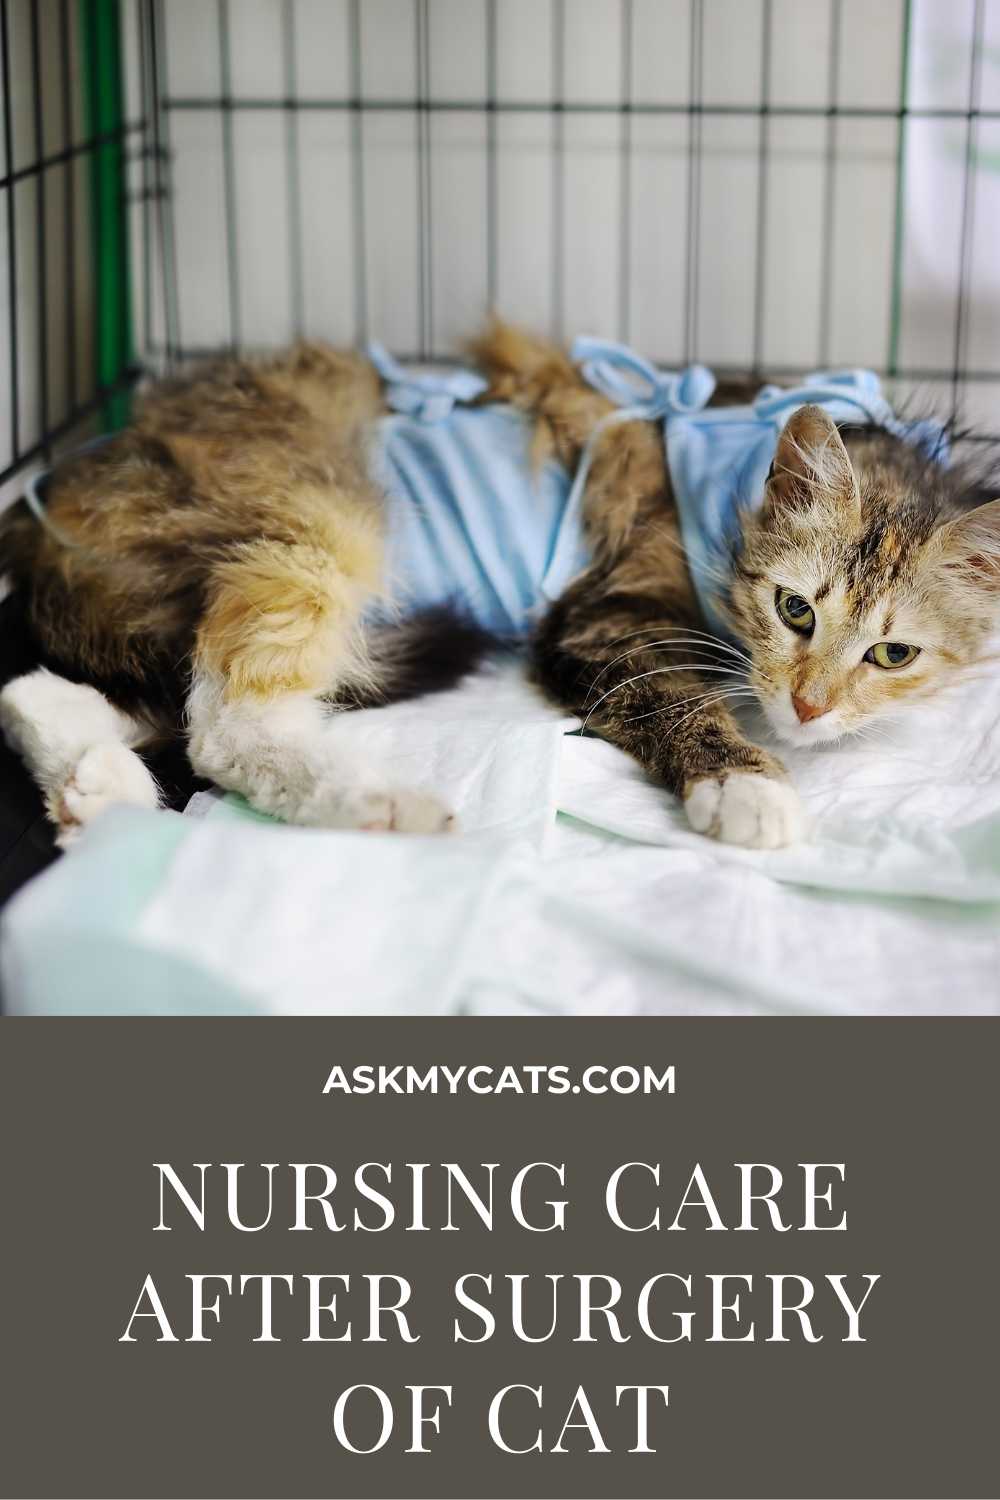 How To Keep Your Cat From Jumping After Surgery? Know The Possible Steps!